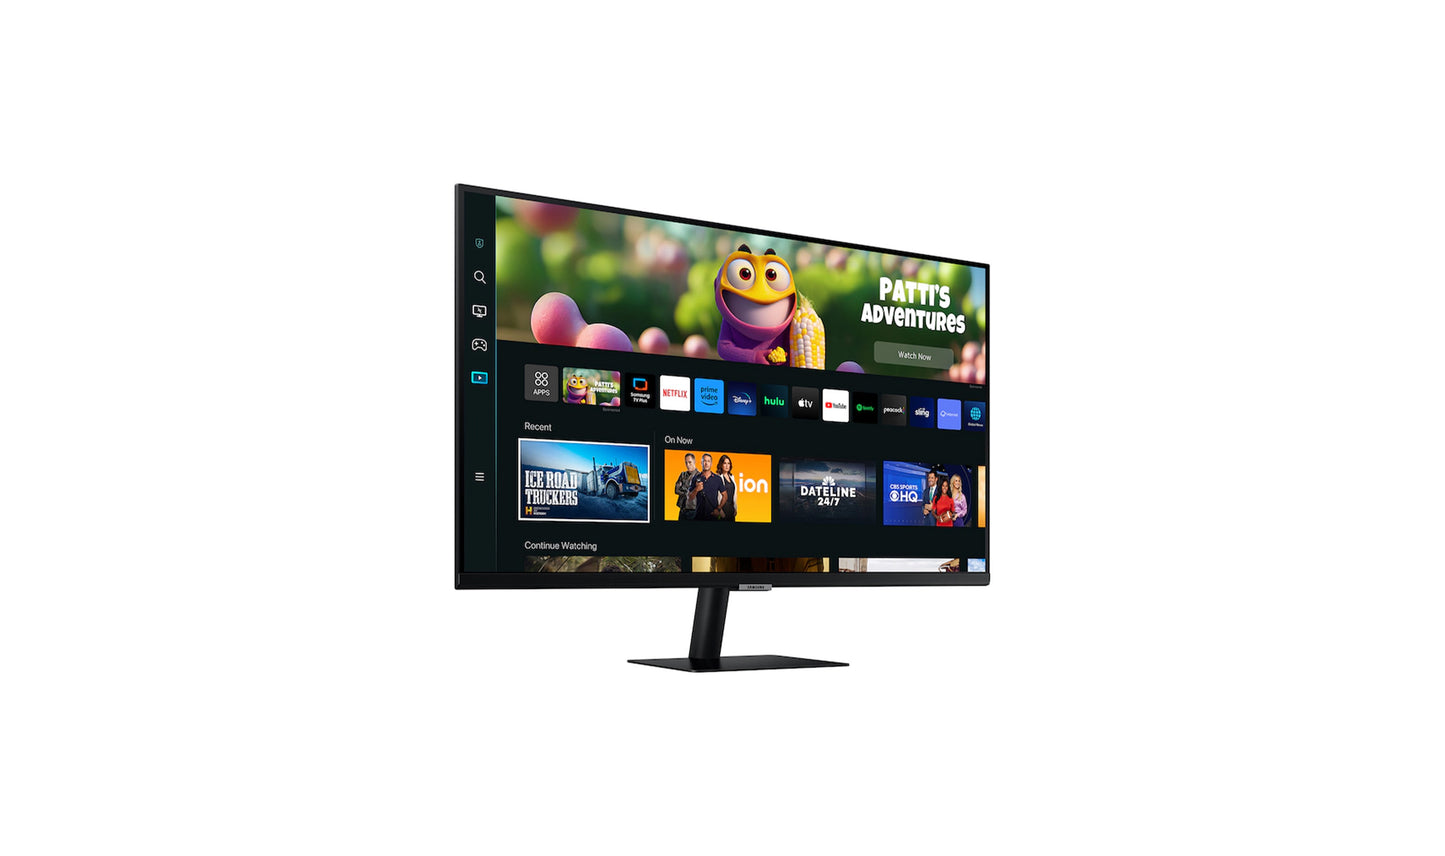 27" M50B FHD Smart Monitor with Streaming TV in Black and White